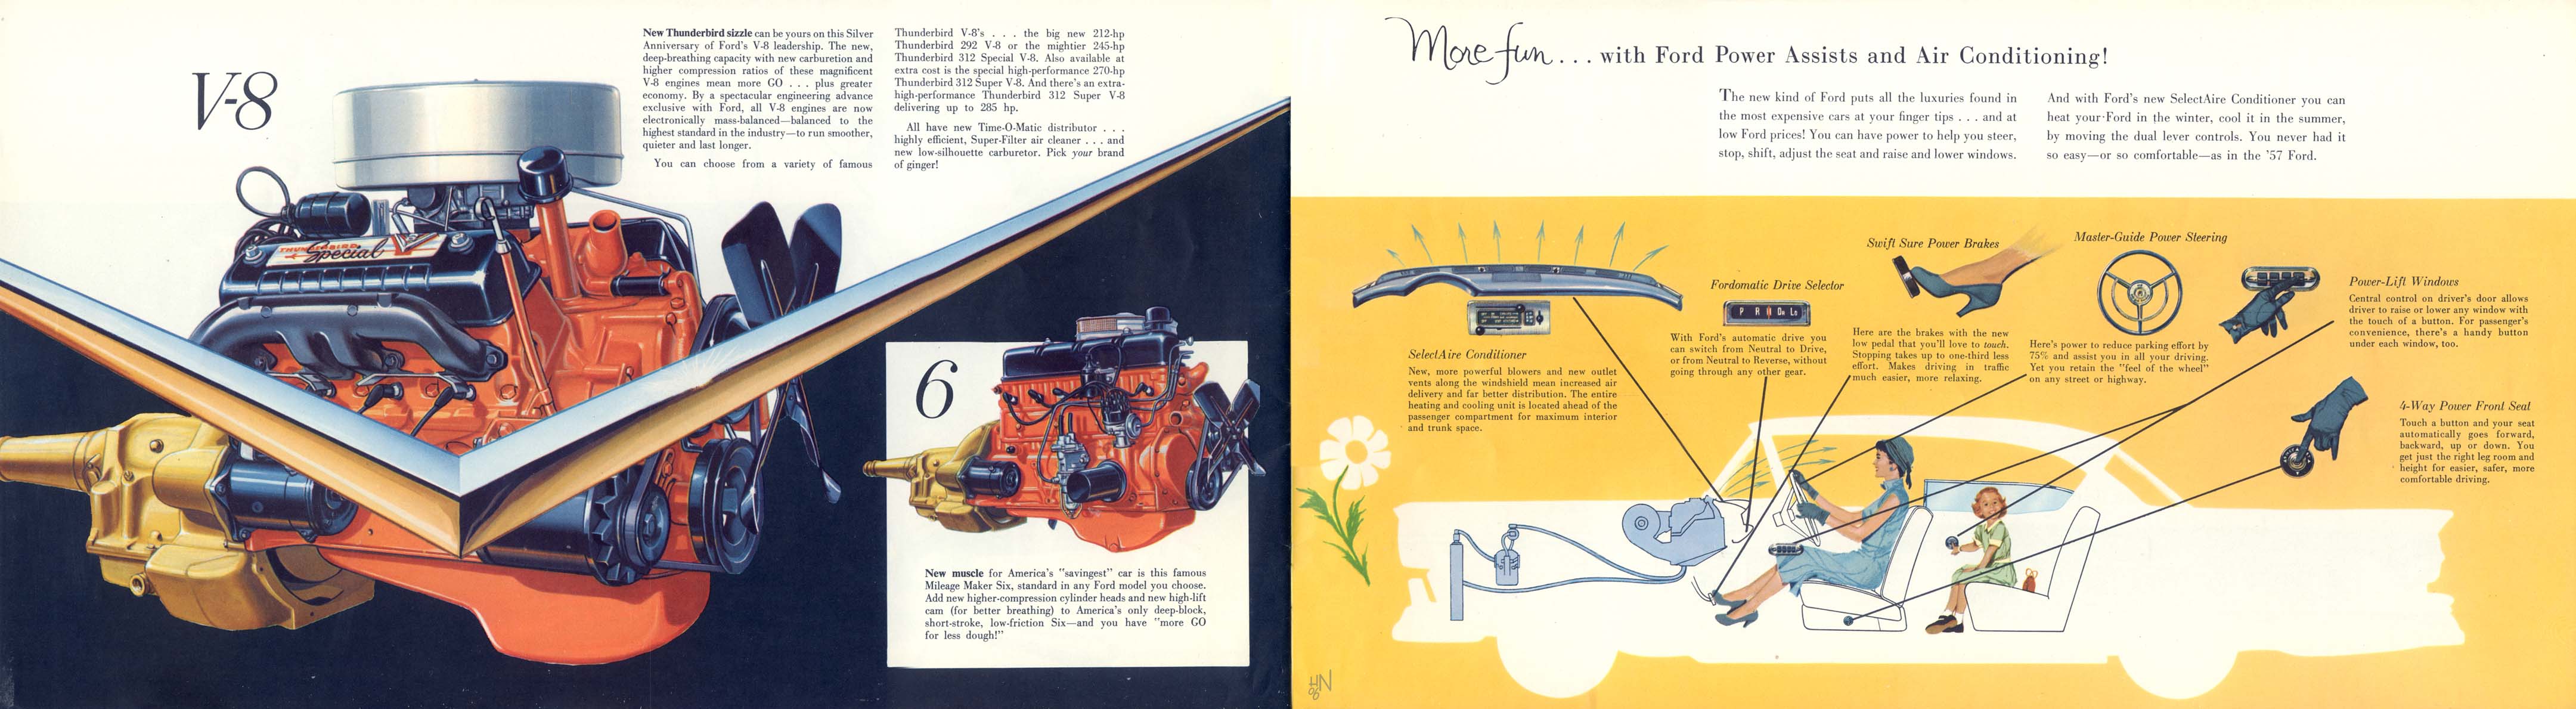 1957 Ford Fairlane Brochure Page 1